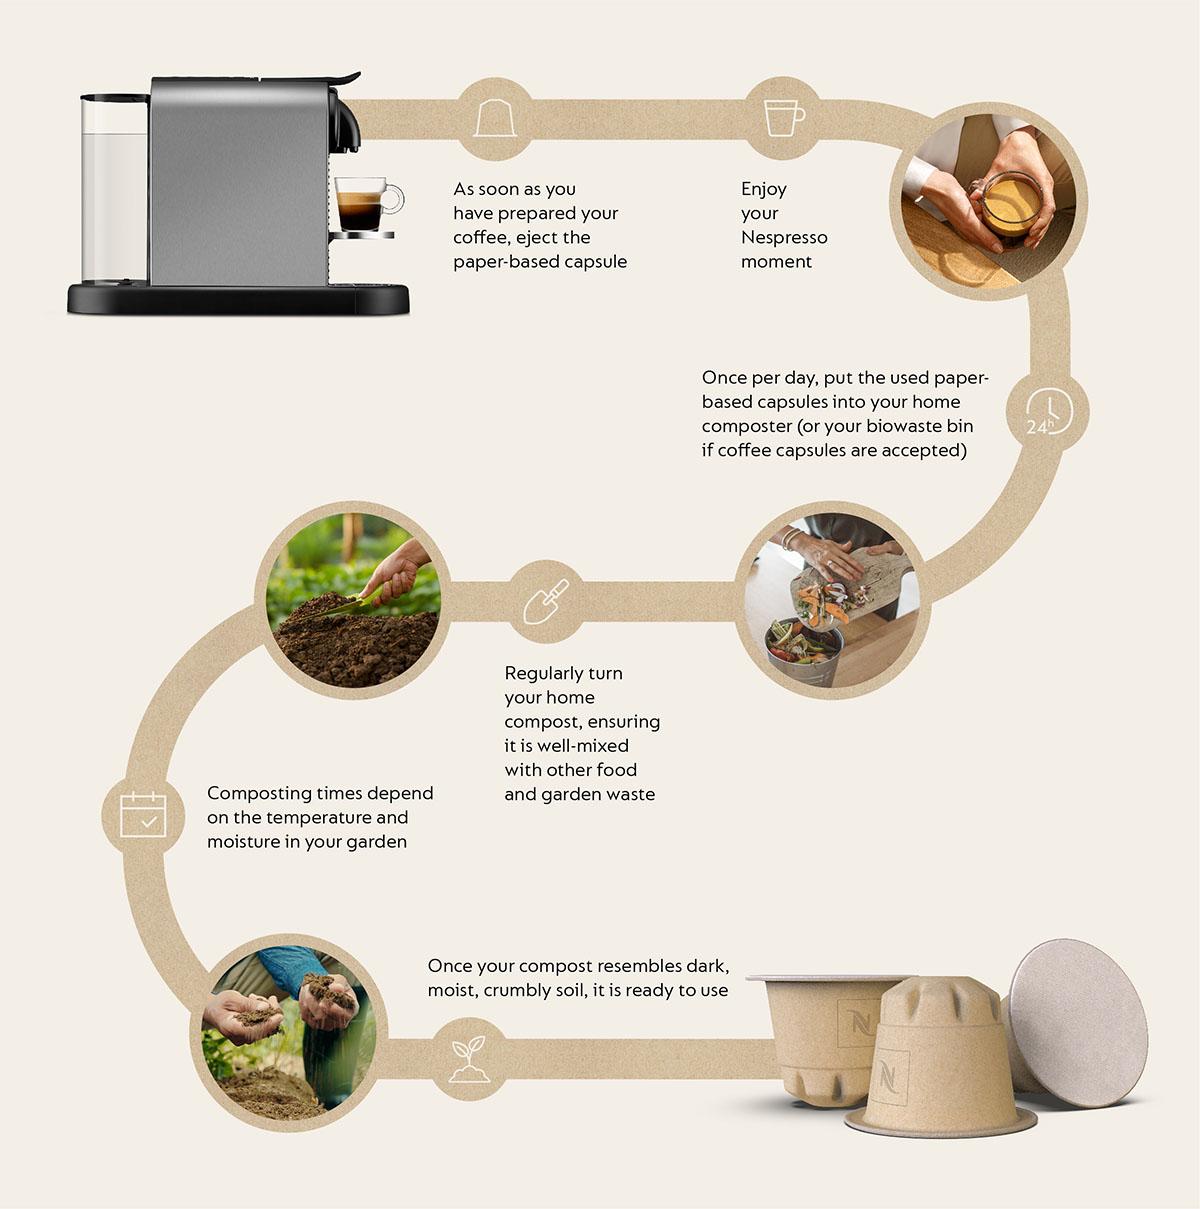 Nestlé launches new compostable-pod coffee machine - FoodBev Media